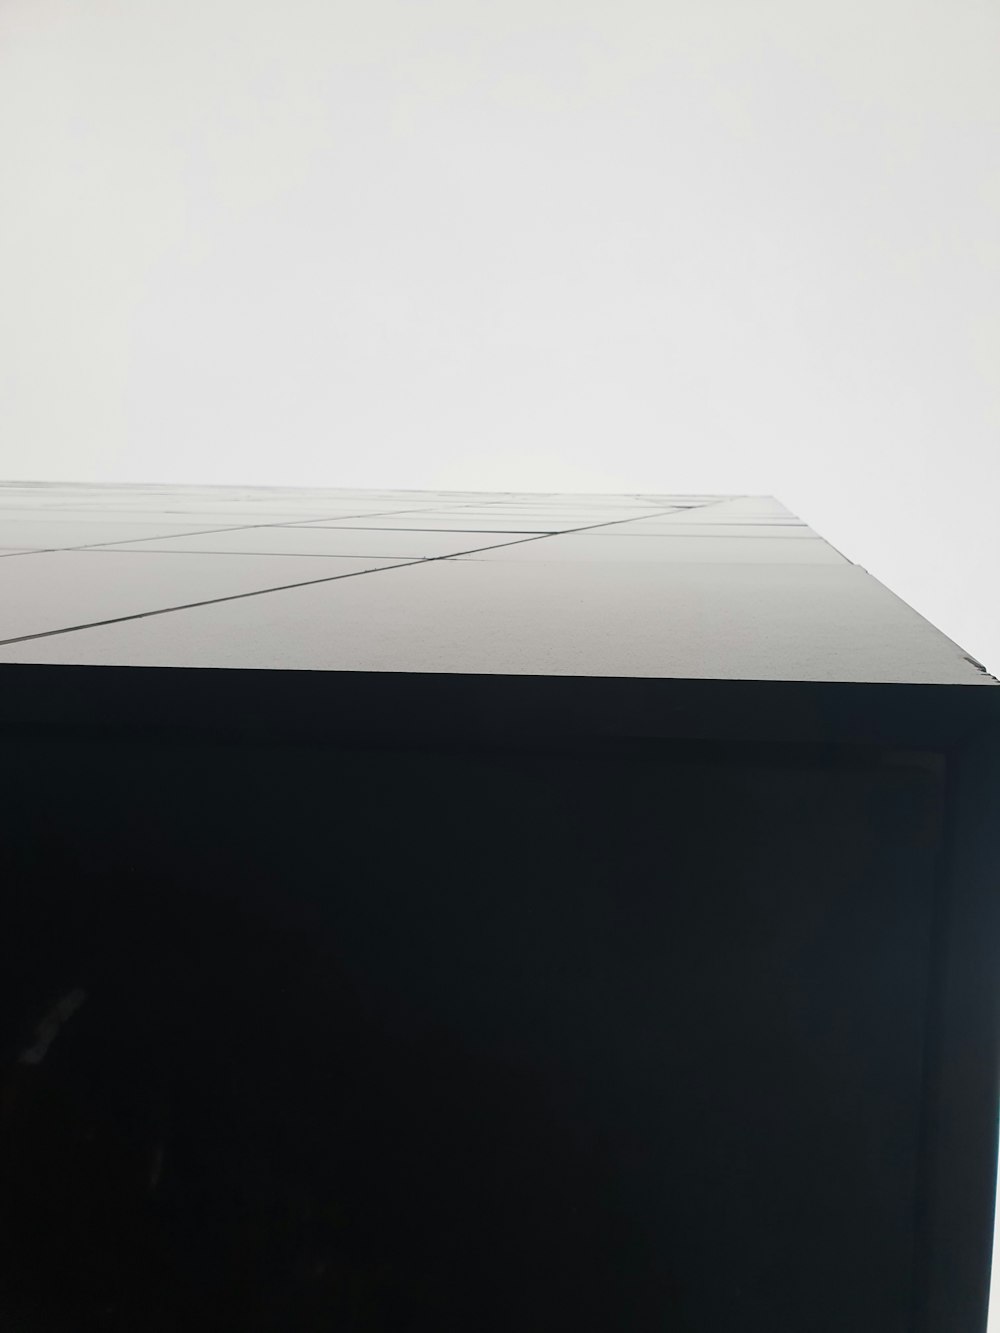 a black rectangular object with a white line across the top